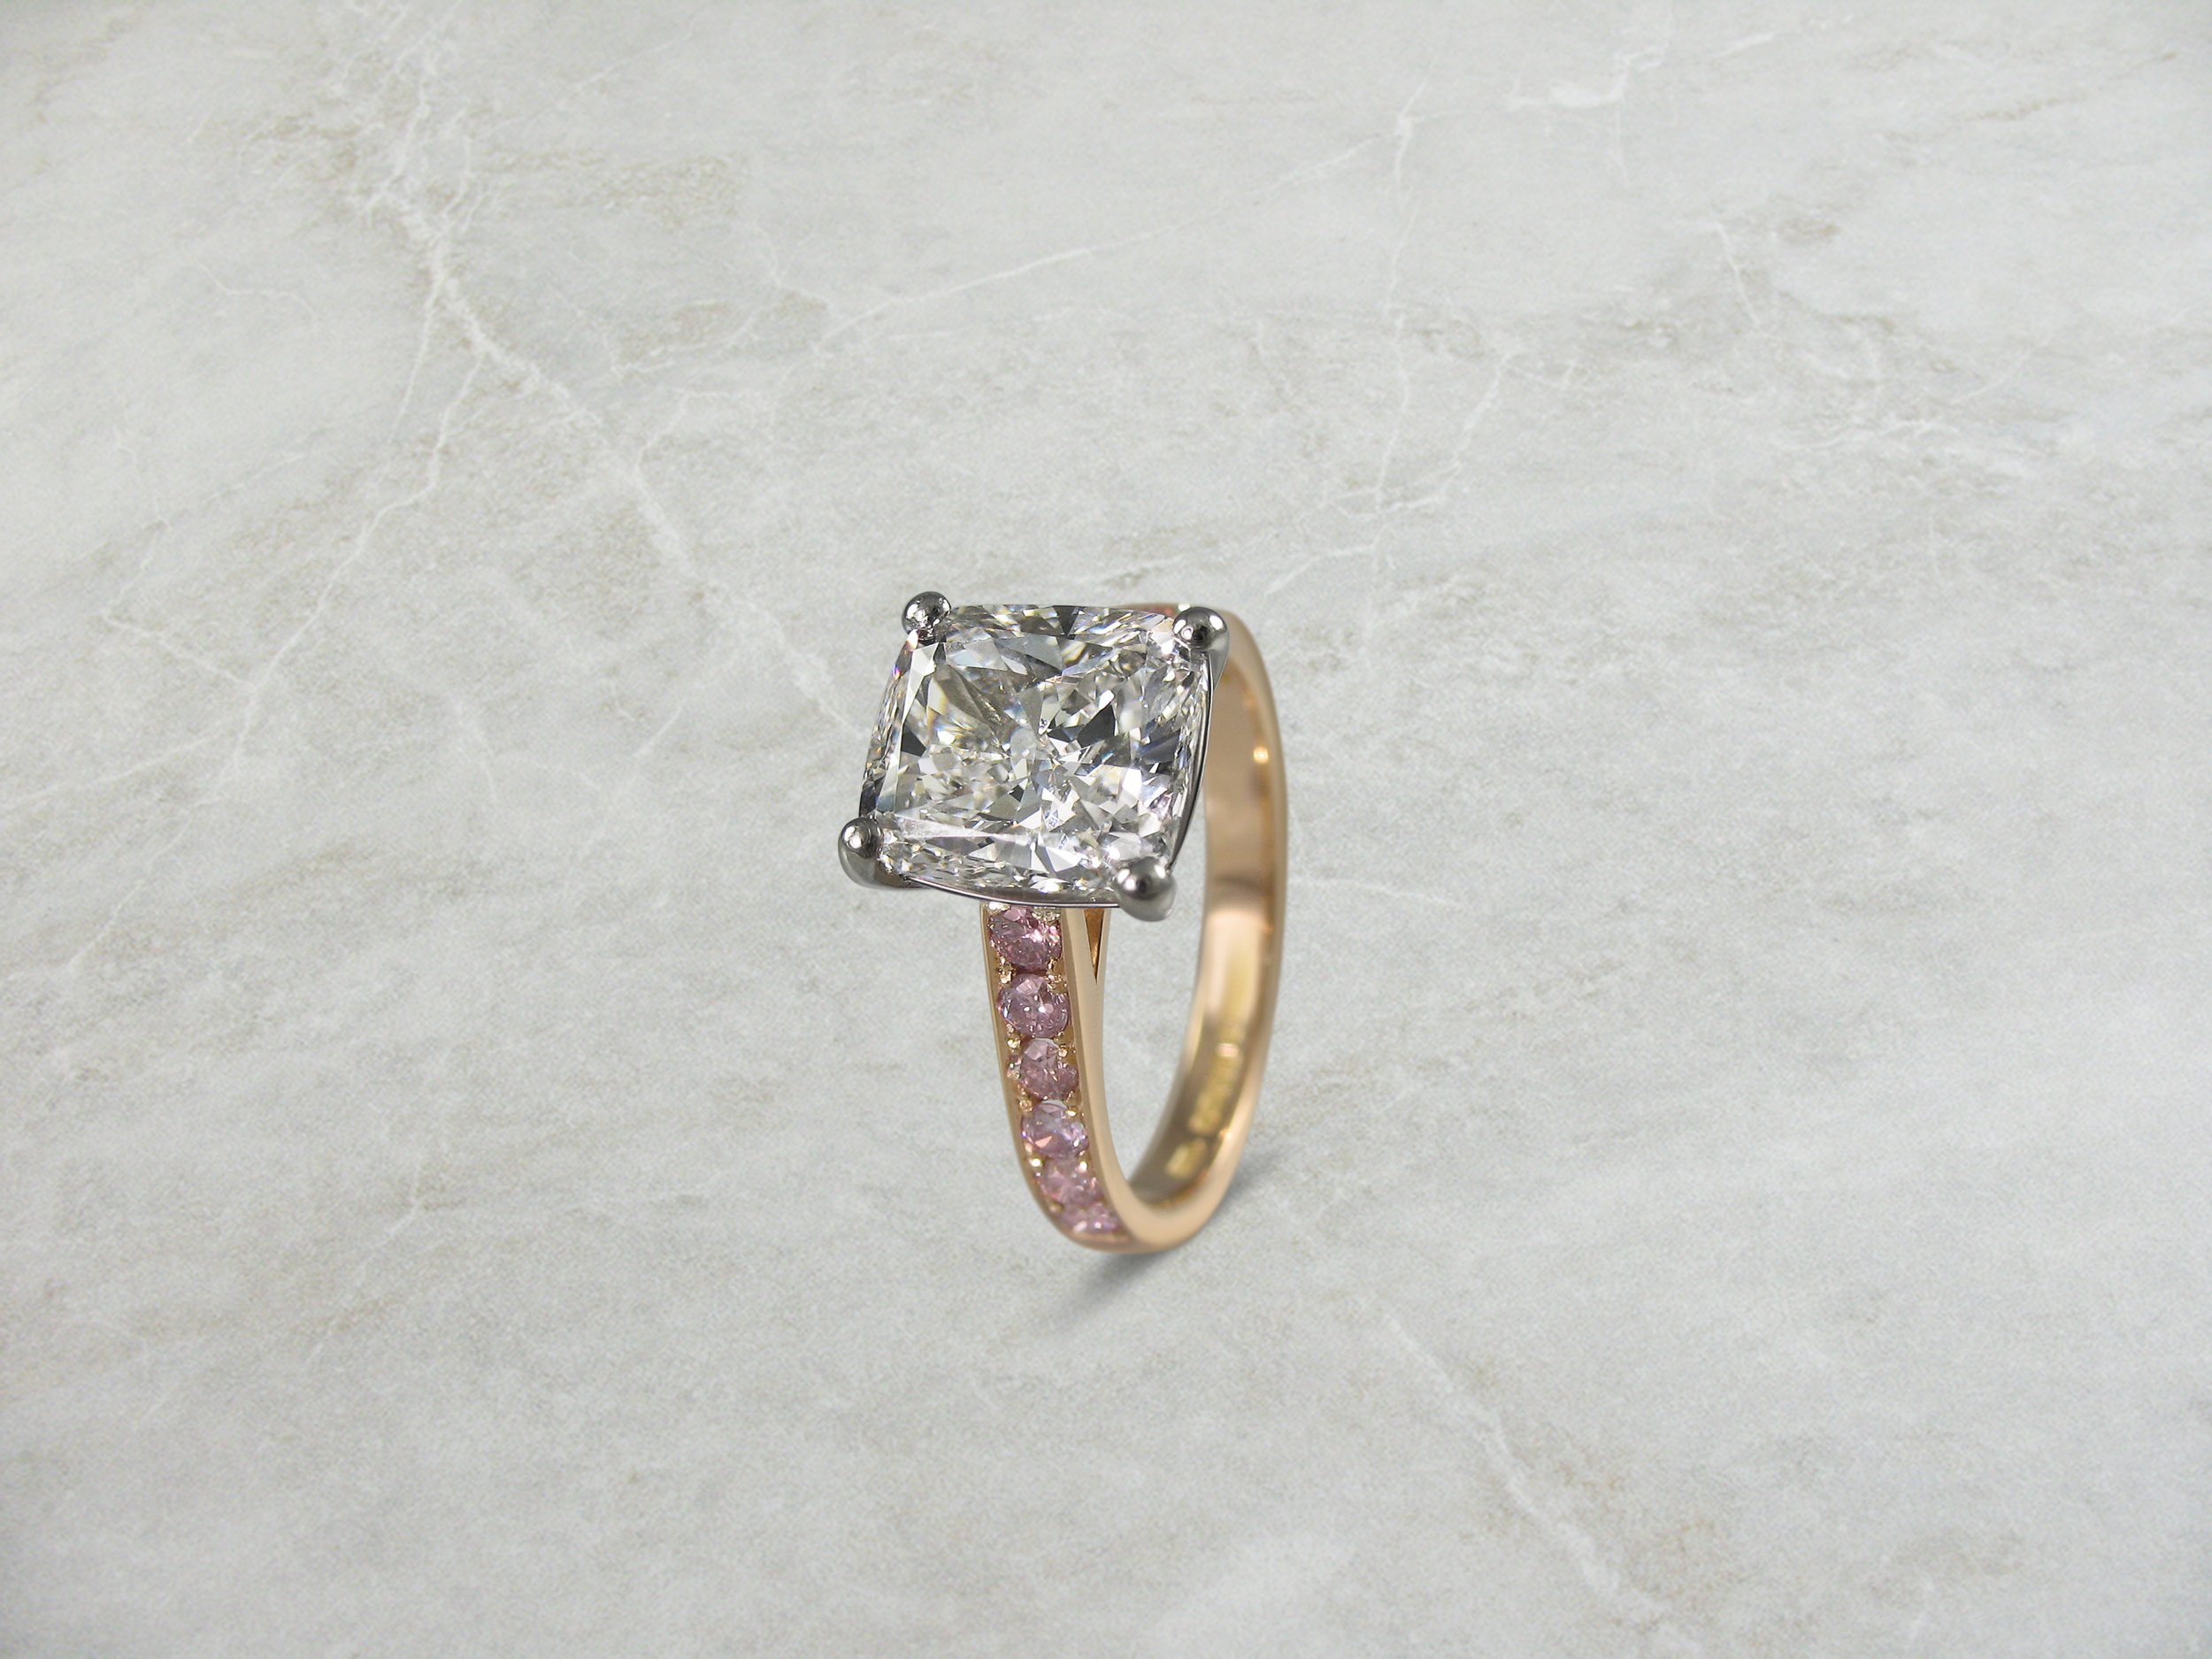 Diamond engagement ring with fancy pink diamond shoulders